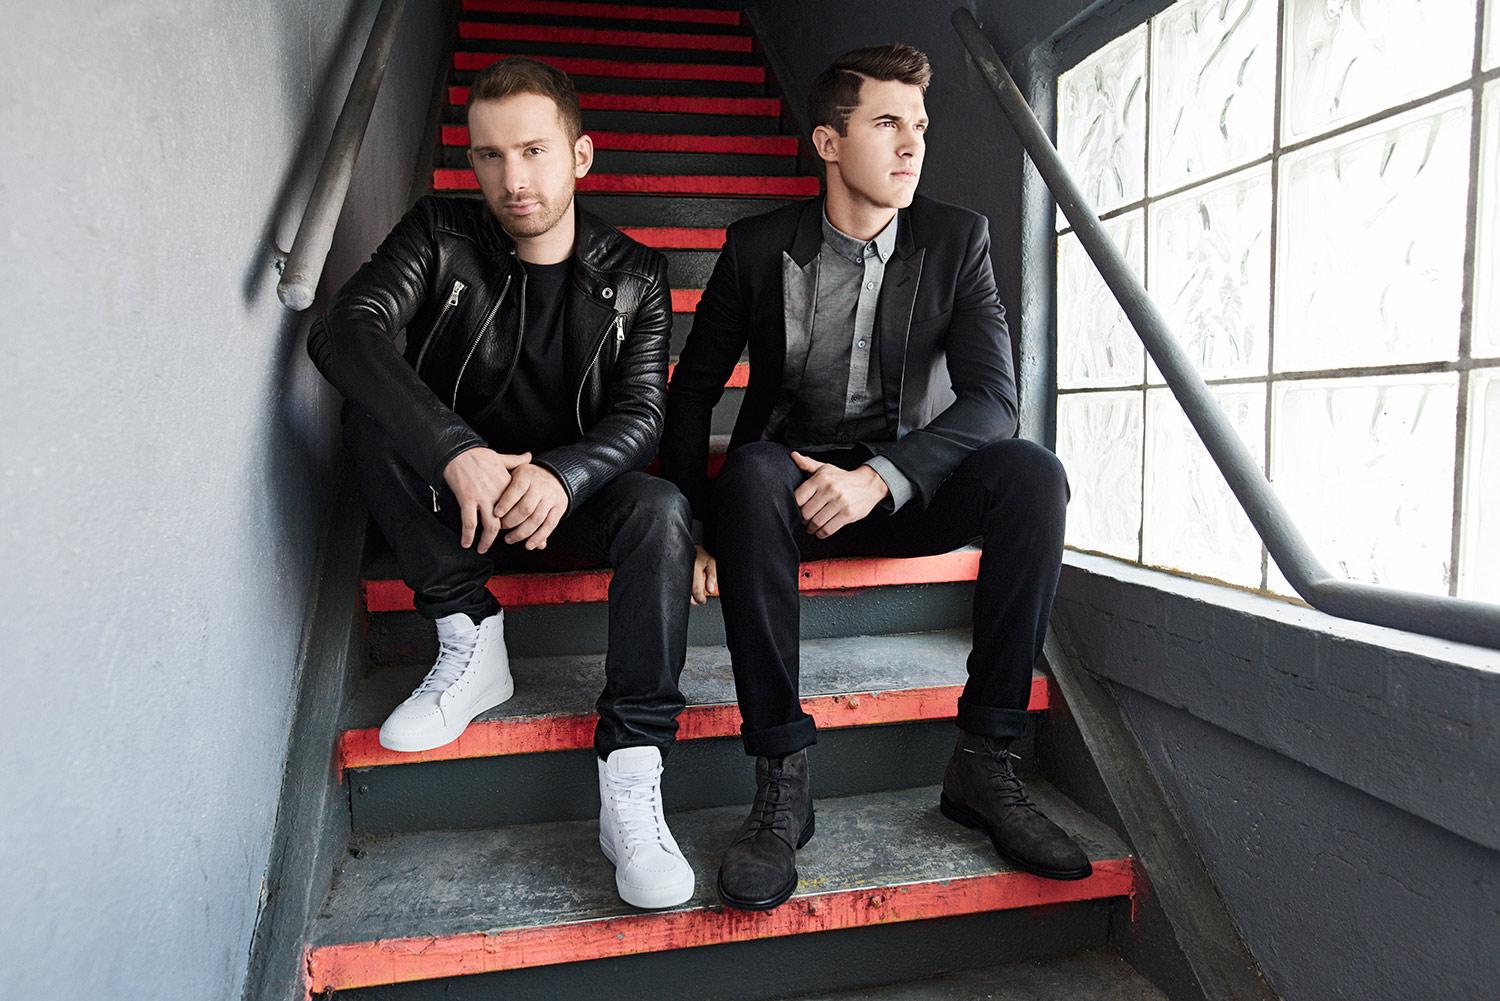 YouTube famous duo Timeflies to play concert UNIVERSITY PRESS